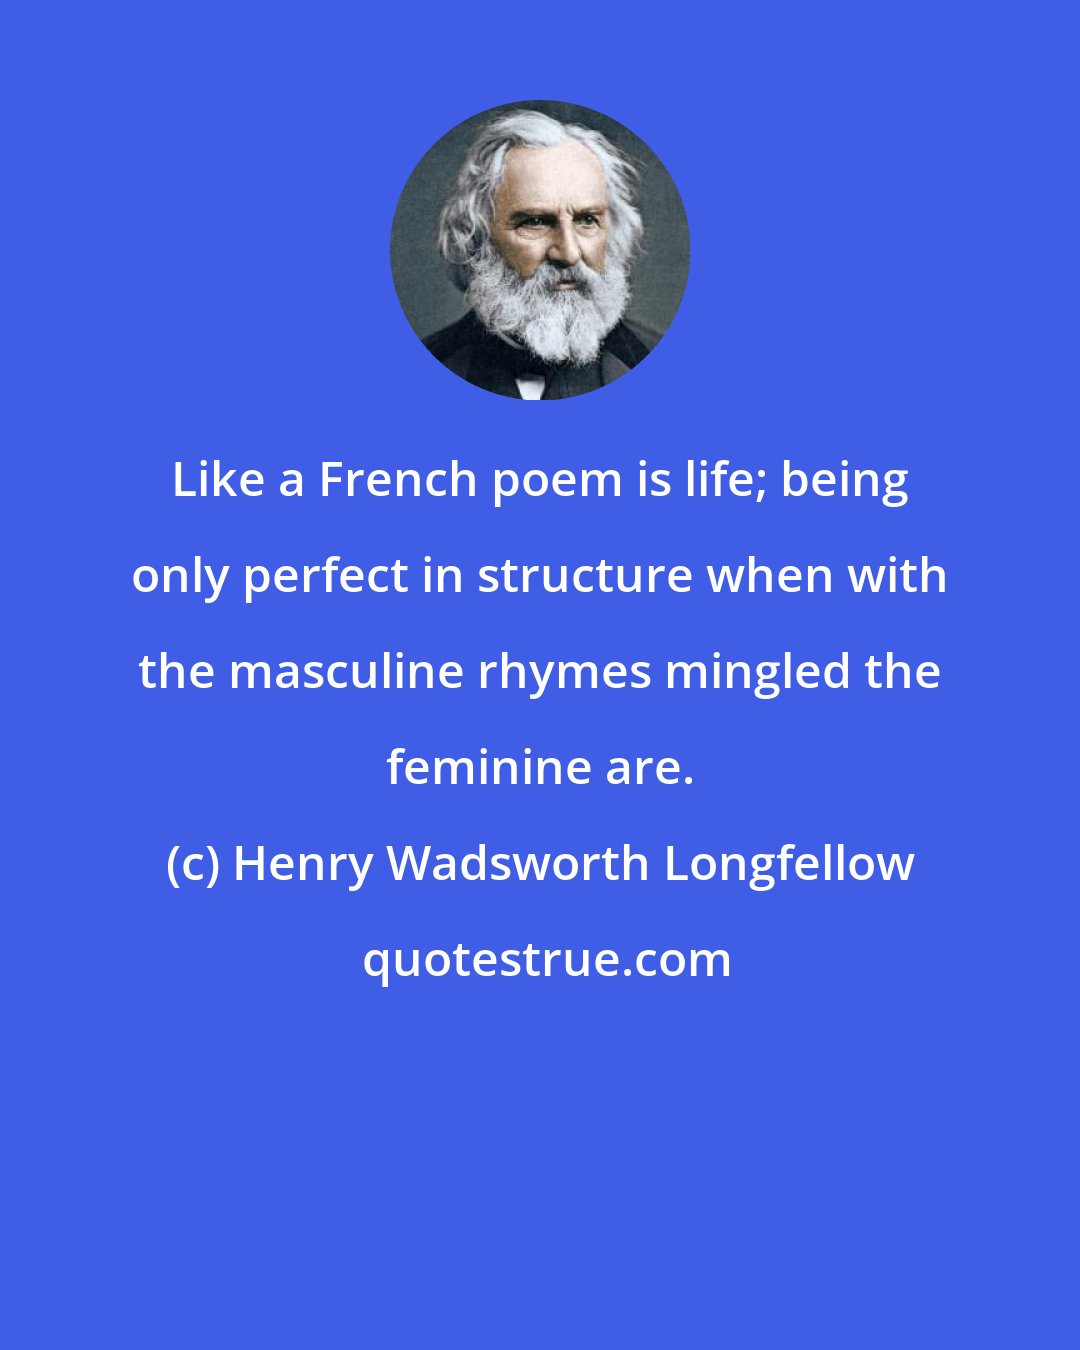 Henry Wadsworth Longfellow: Like a French poem is life; being only perfect in structure when with the masculine rhymes mingled the feminine are.